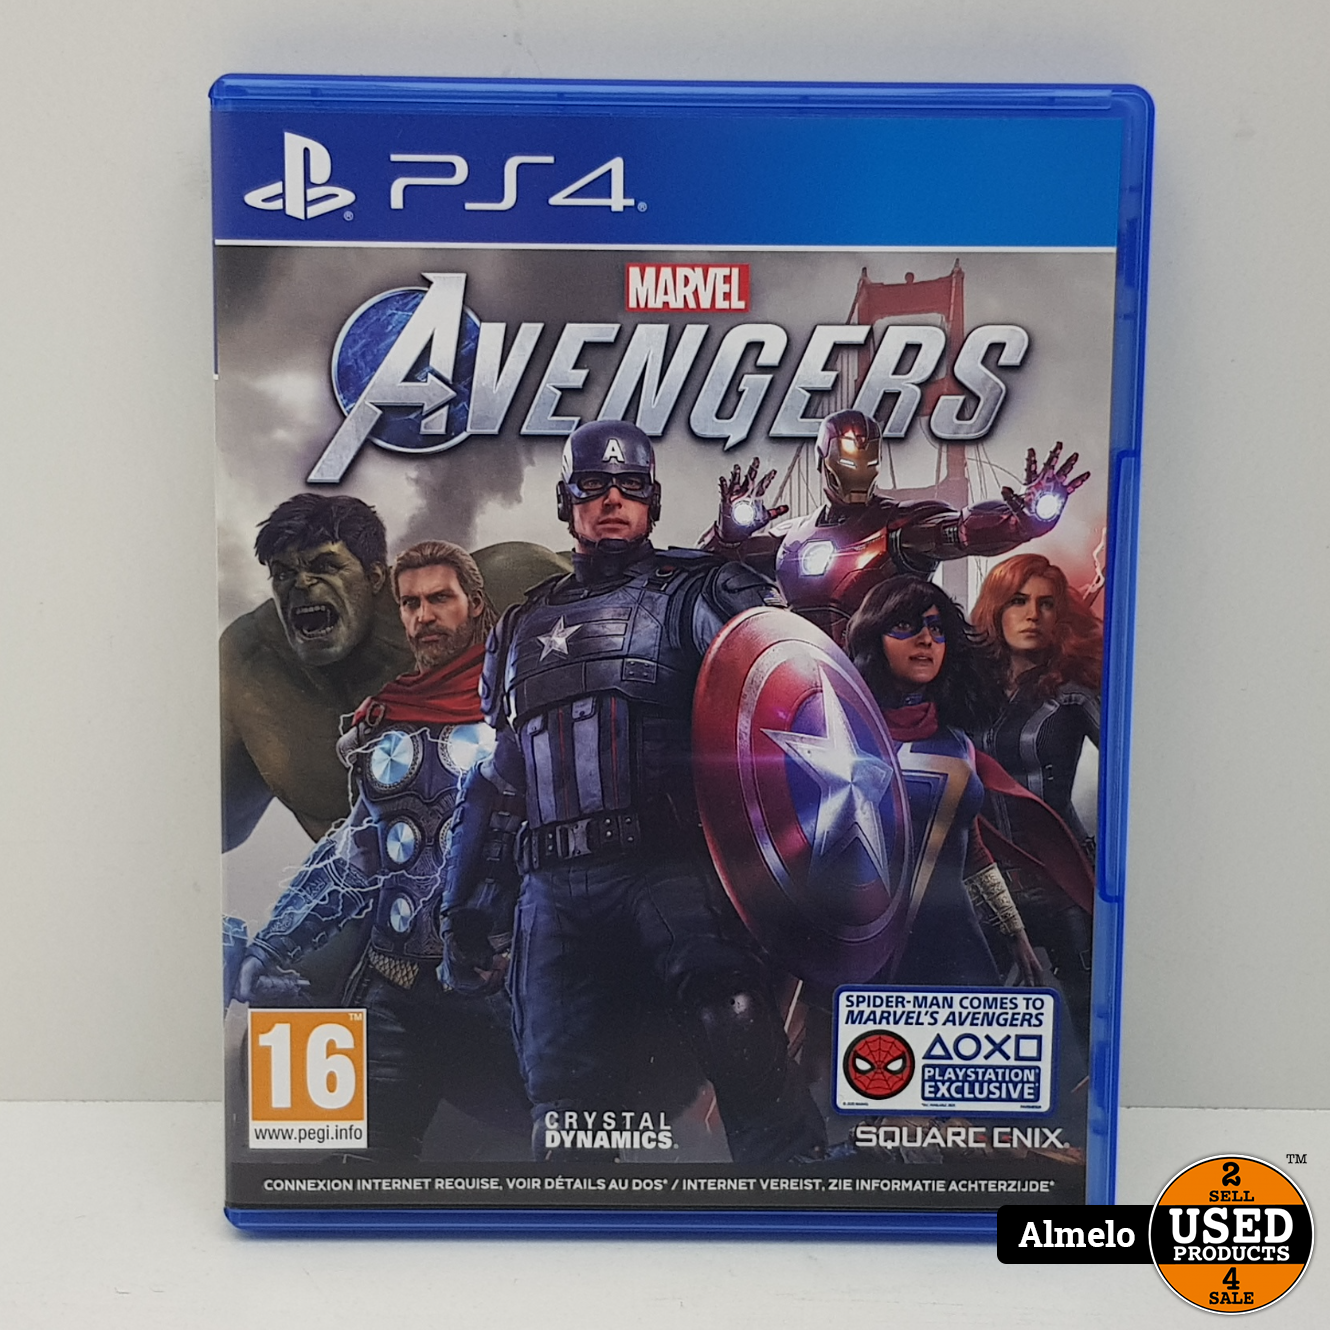 Sony Playstation Marvel's Avengers Used Products Almelo